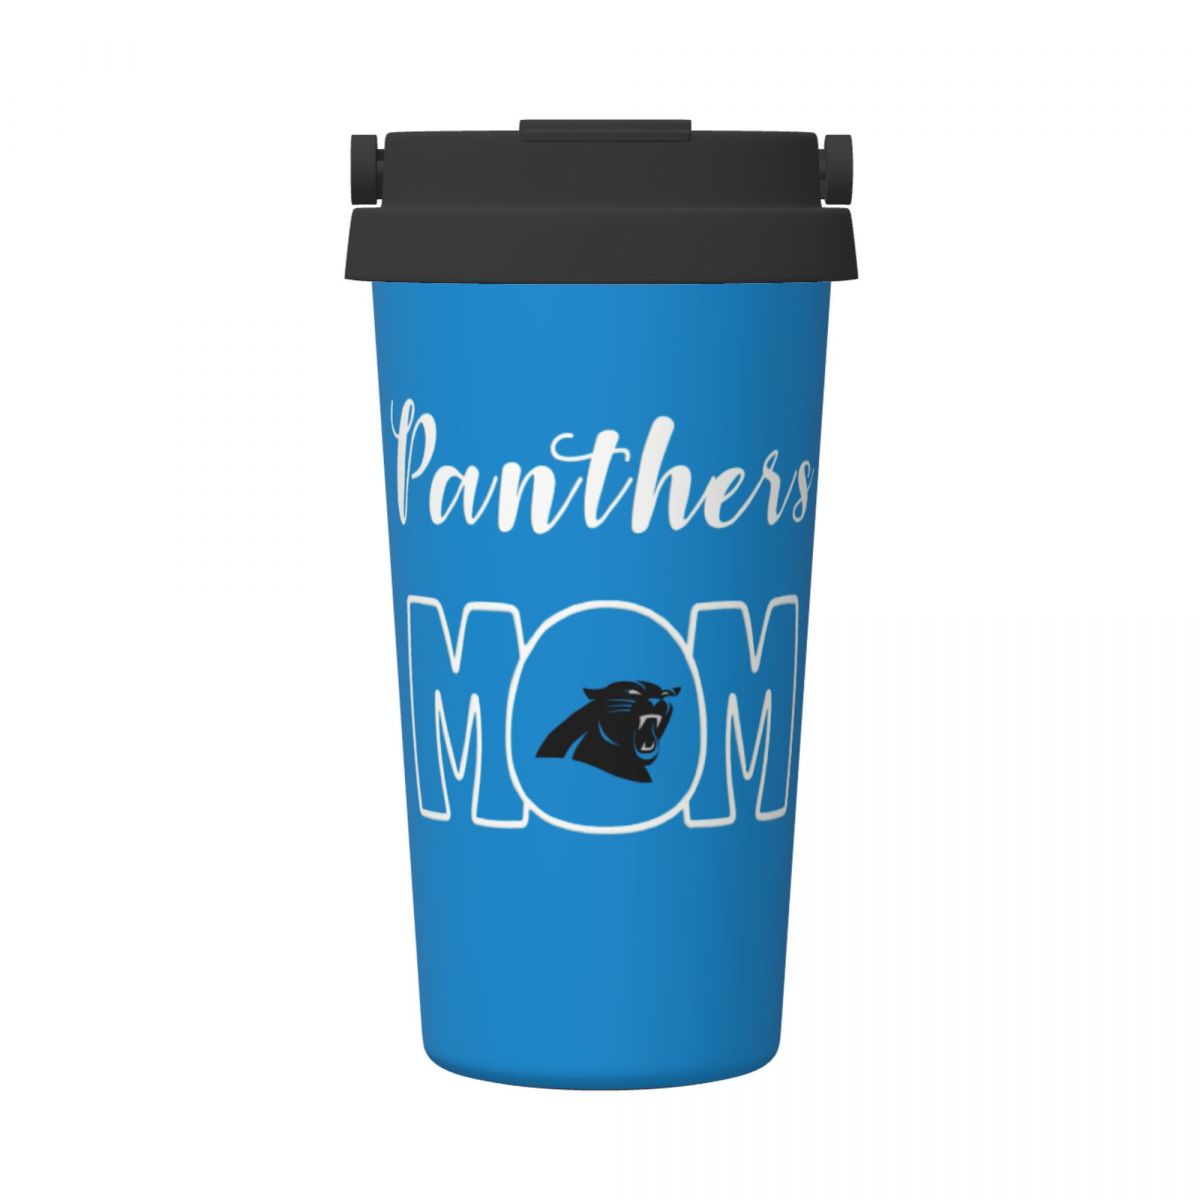 Carolina Panthers Mom Reusable Coffee Cup with Lid and Handle